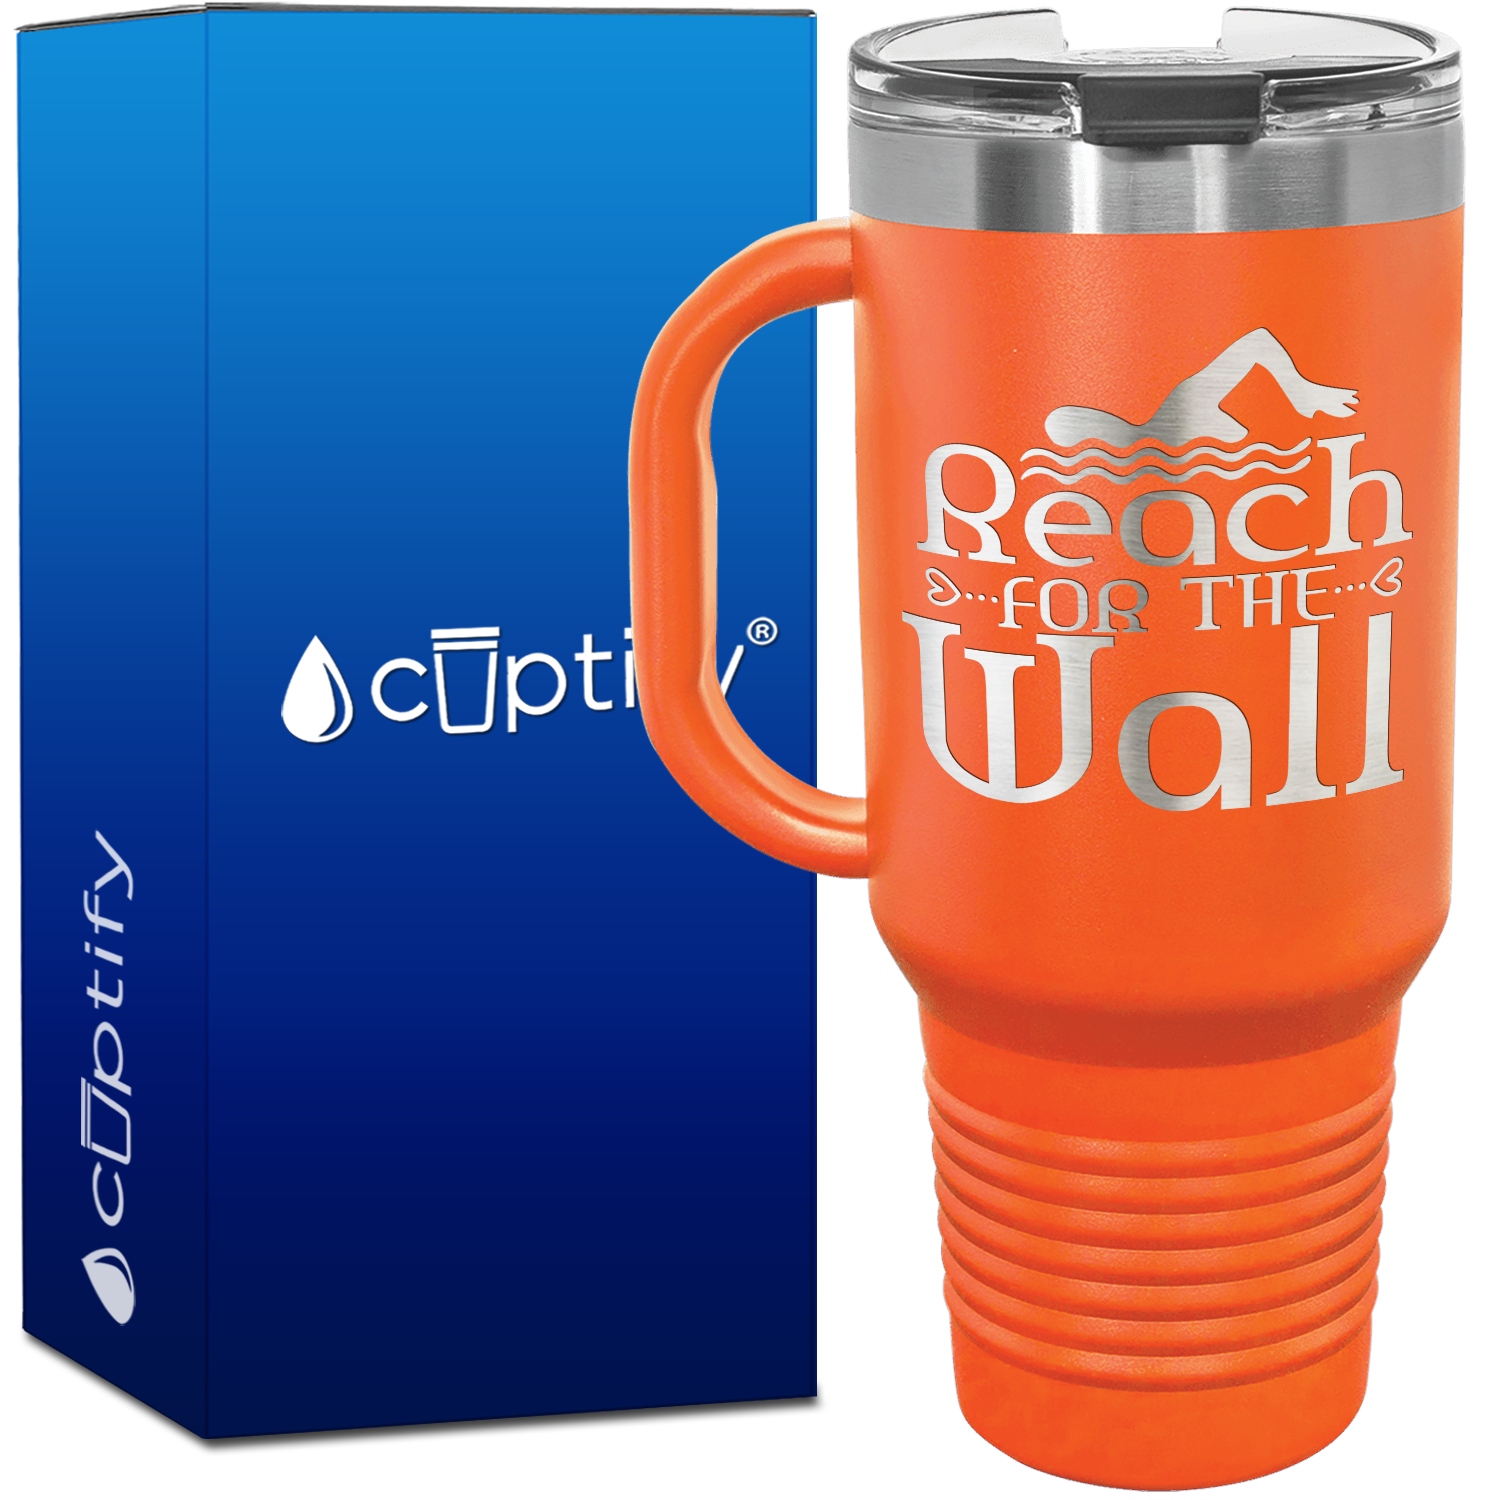 Reach for the Wall with Swimmer 40oz Swimming Travel Mug